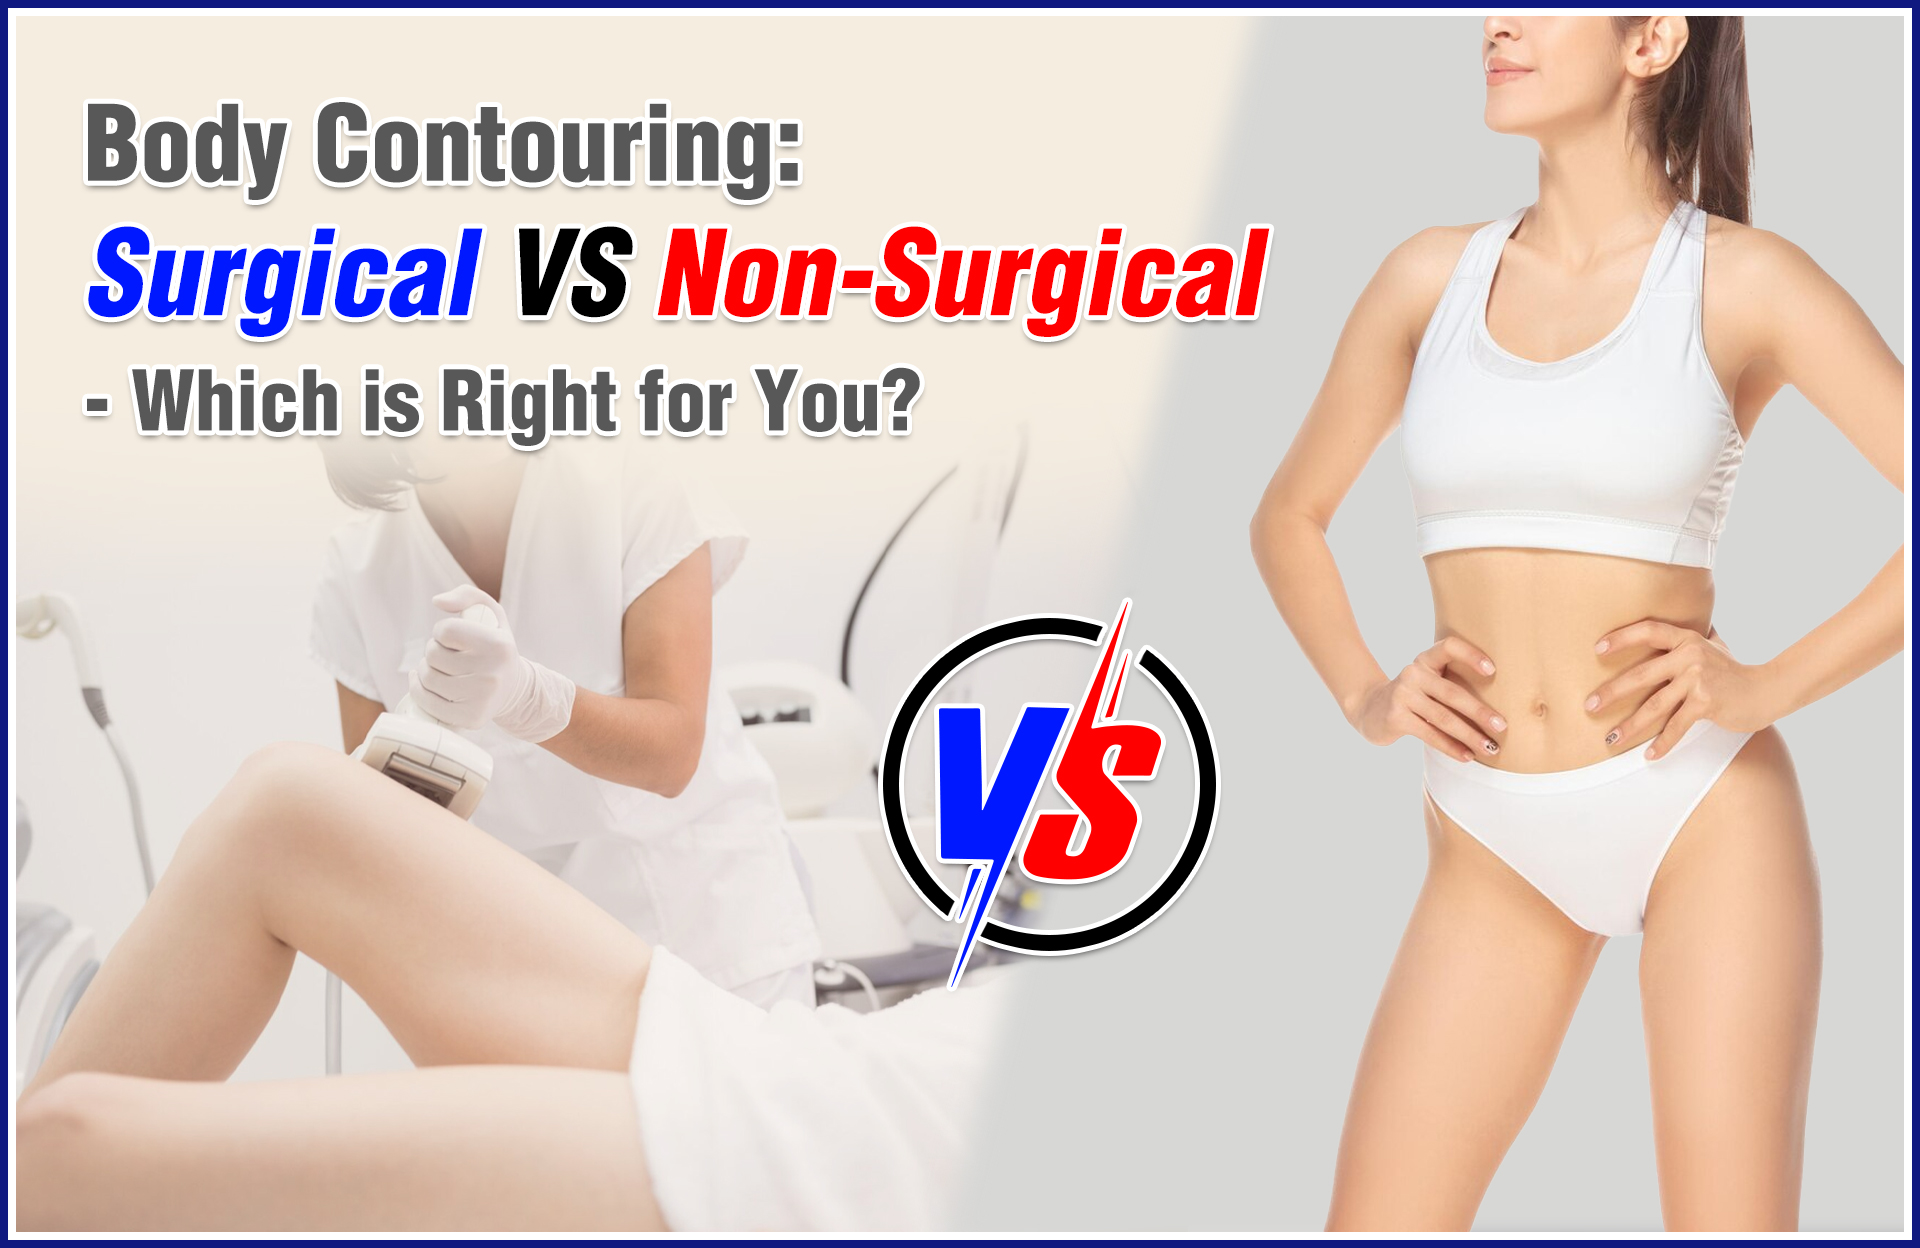 Body Contouring: Surgical Vs. Non-Surgical - Which is Right for You?